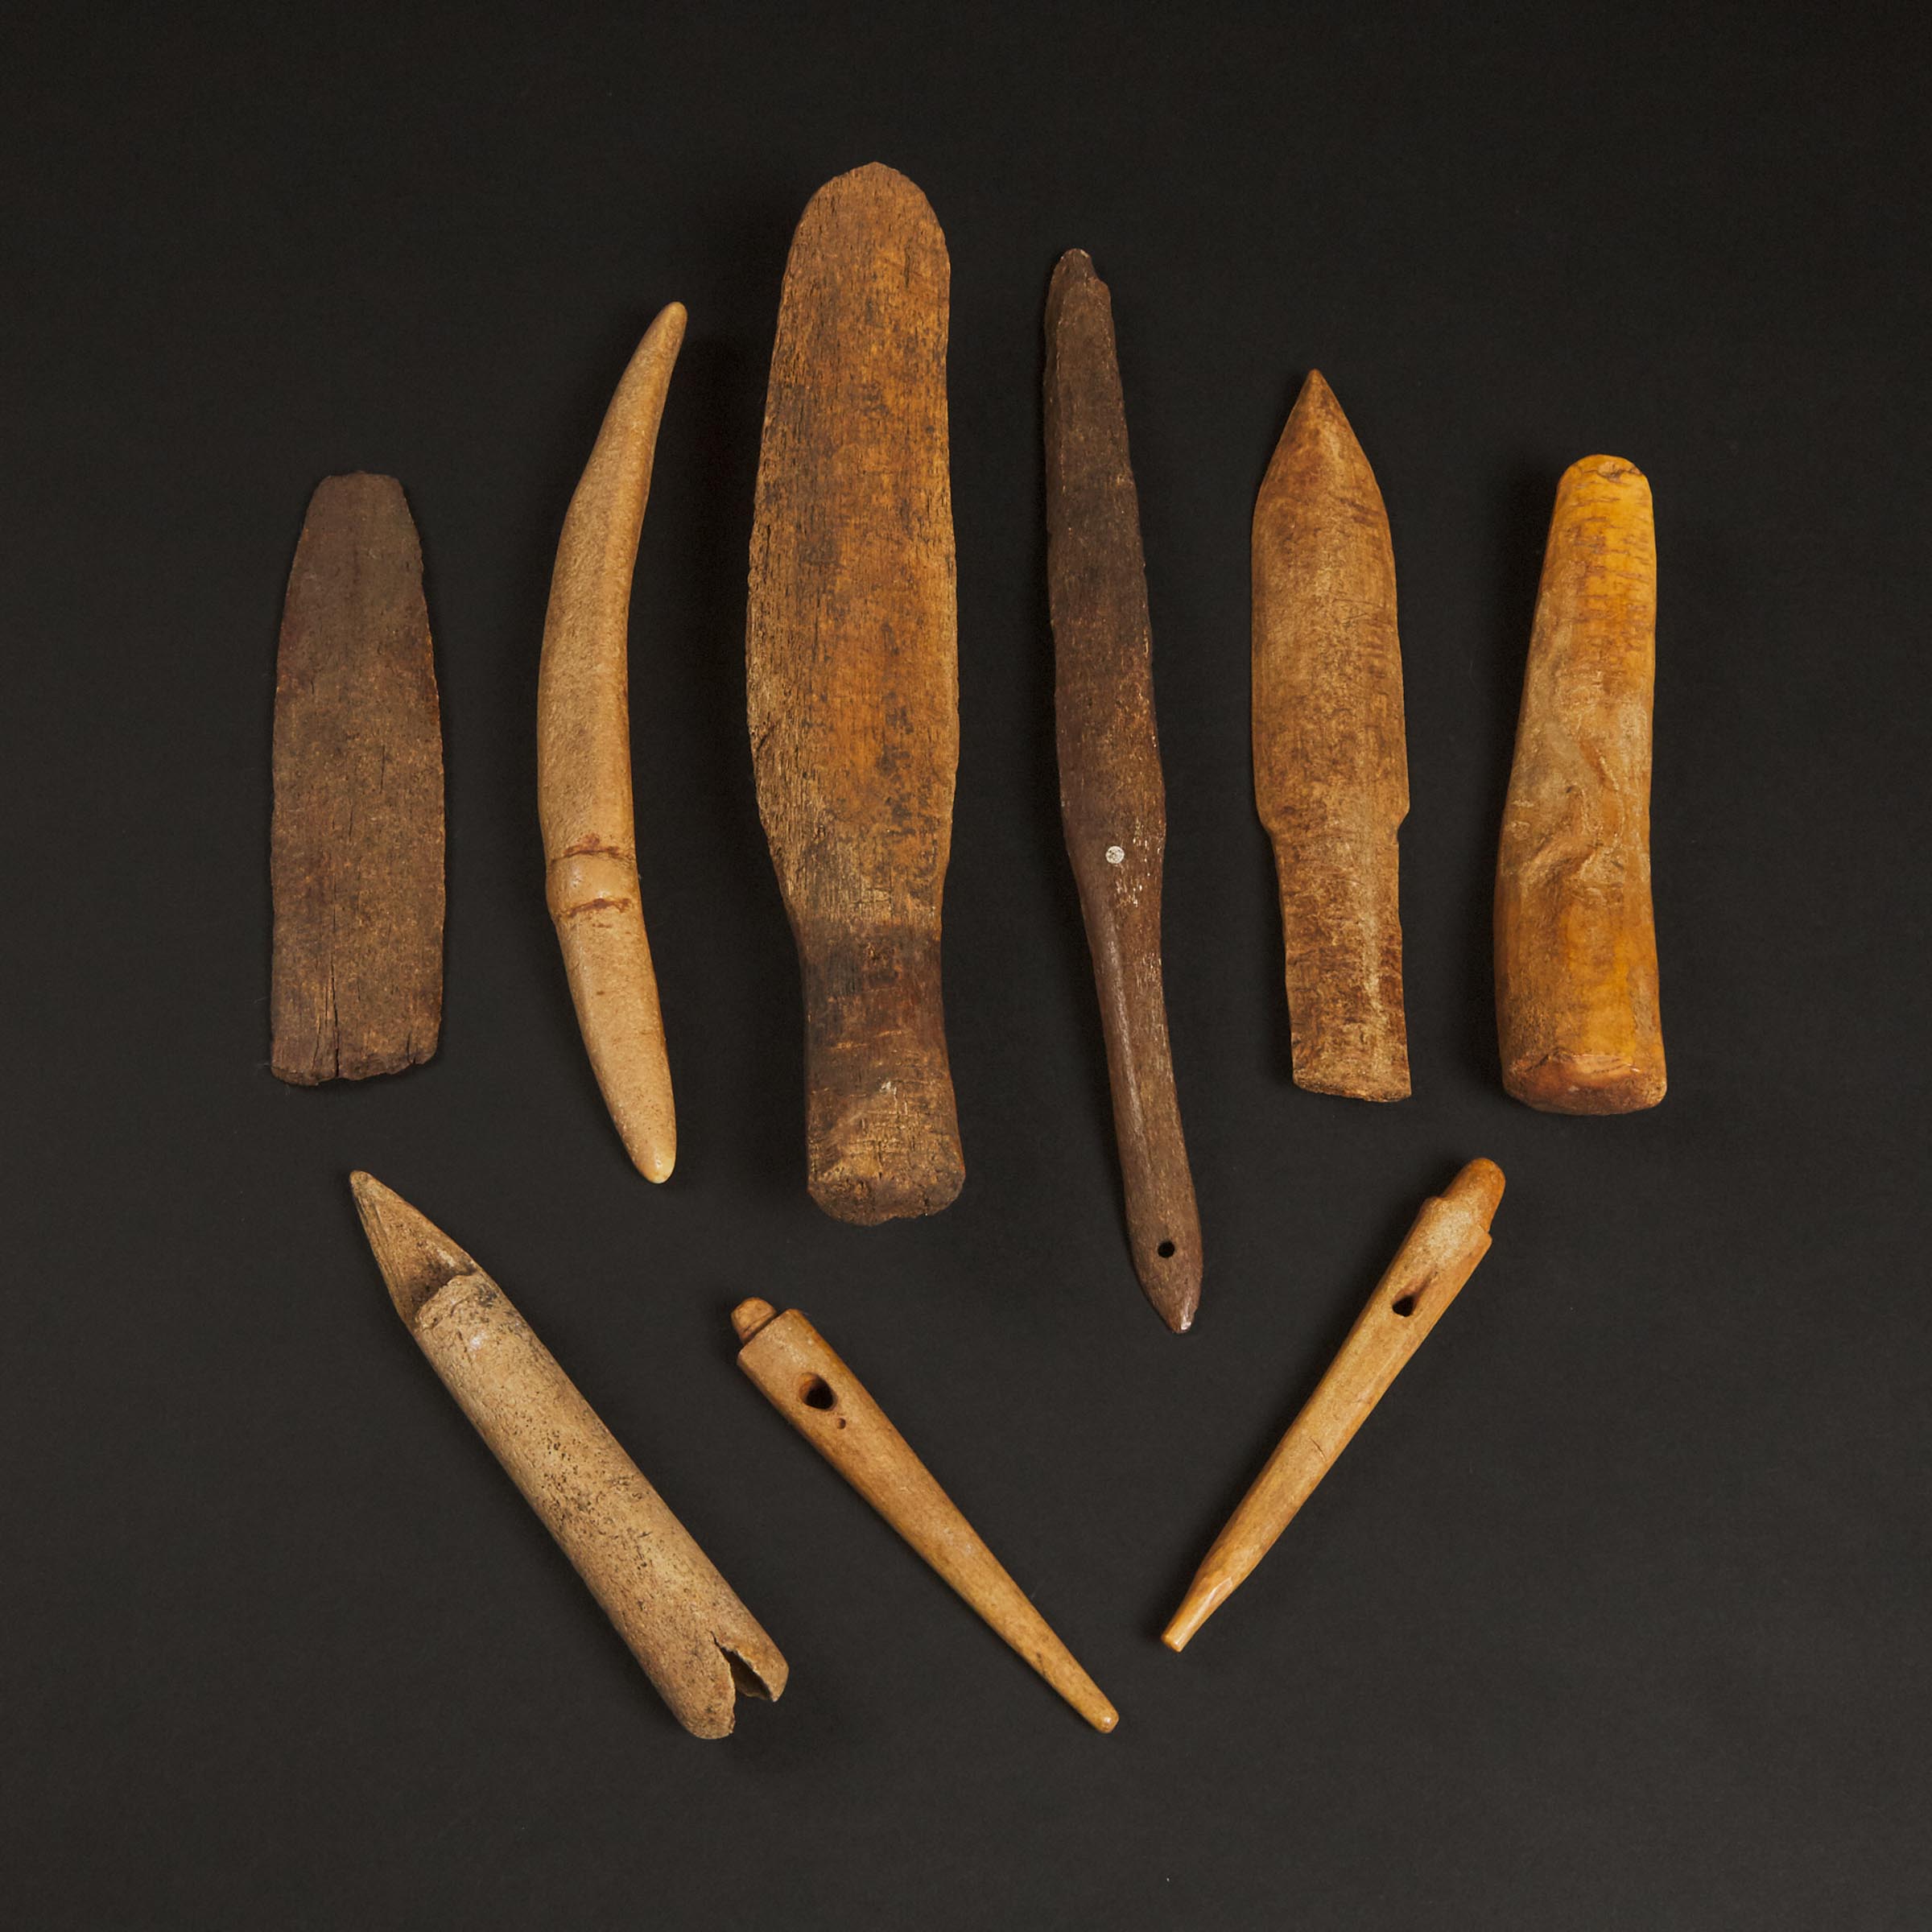 Two Snow Knives and Seven Other Implements, Yupik, Inupiat, Savoonga, Sivuqaq (St. Lawrence Island), and Sitaisaq (Brevig Mission), Pre-1900